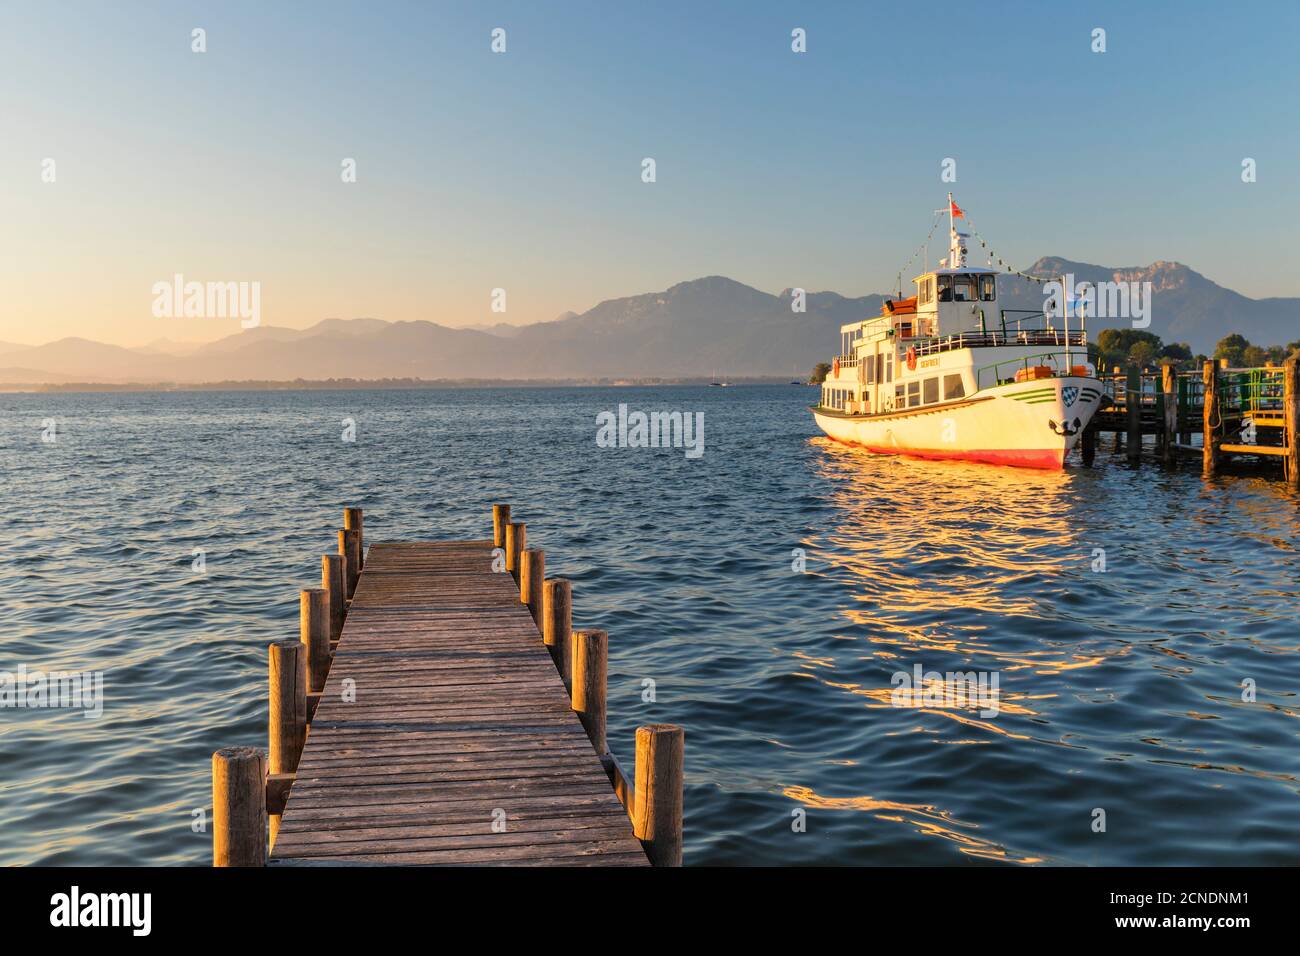 Excursion boat on a jetty at sunrise, Gstadt am Chiemsee, Lake Chiemsee, Upper Bavaria, Germany, Europe Stock Photo